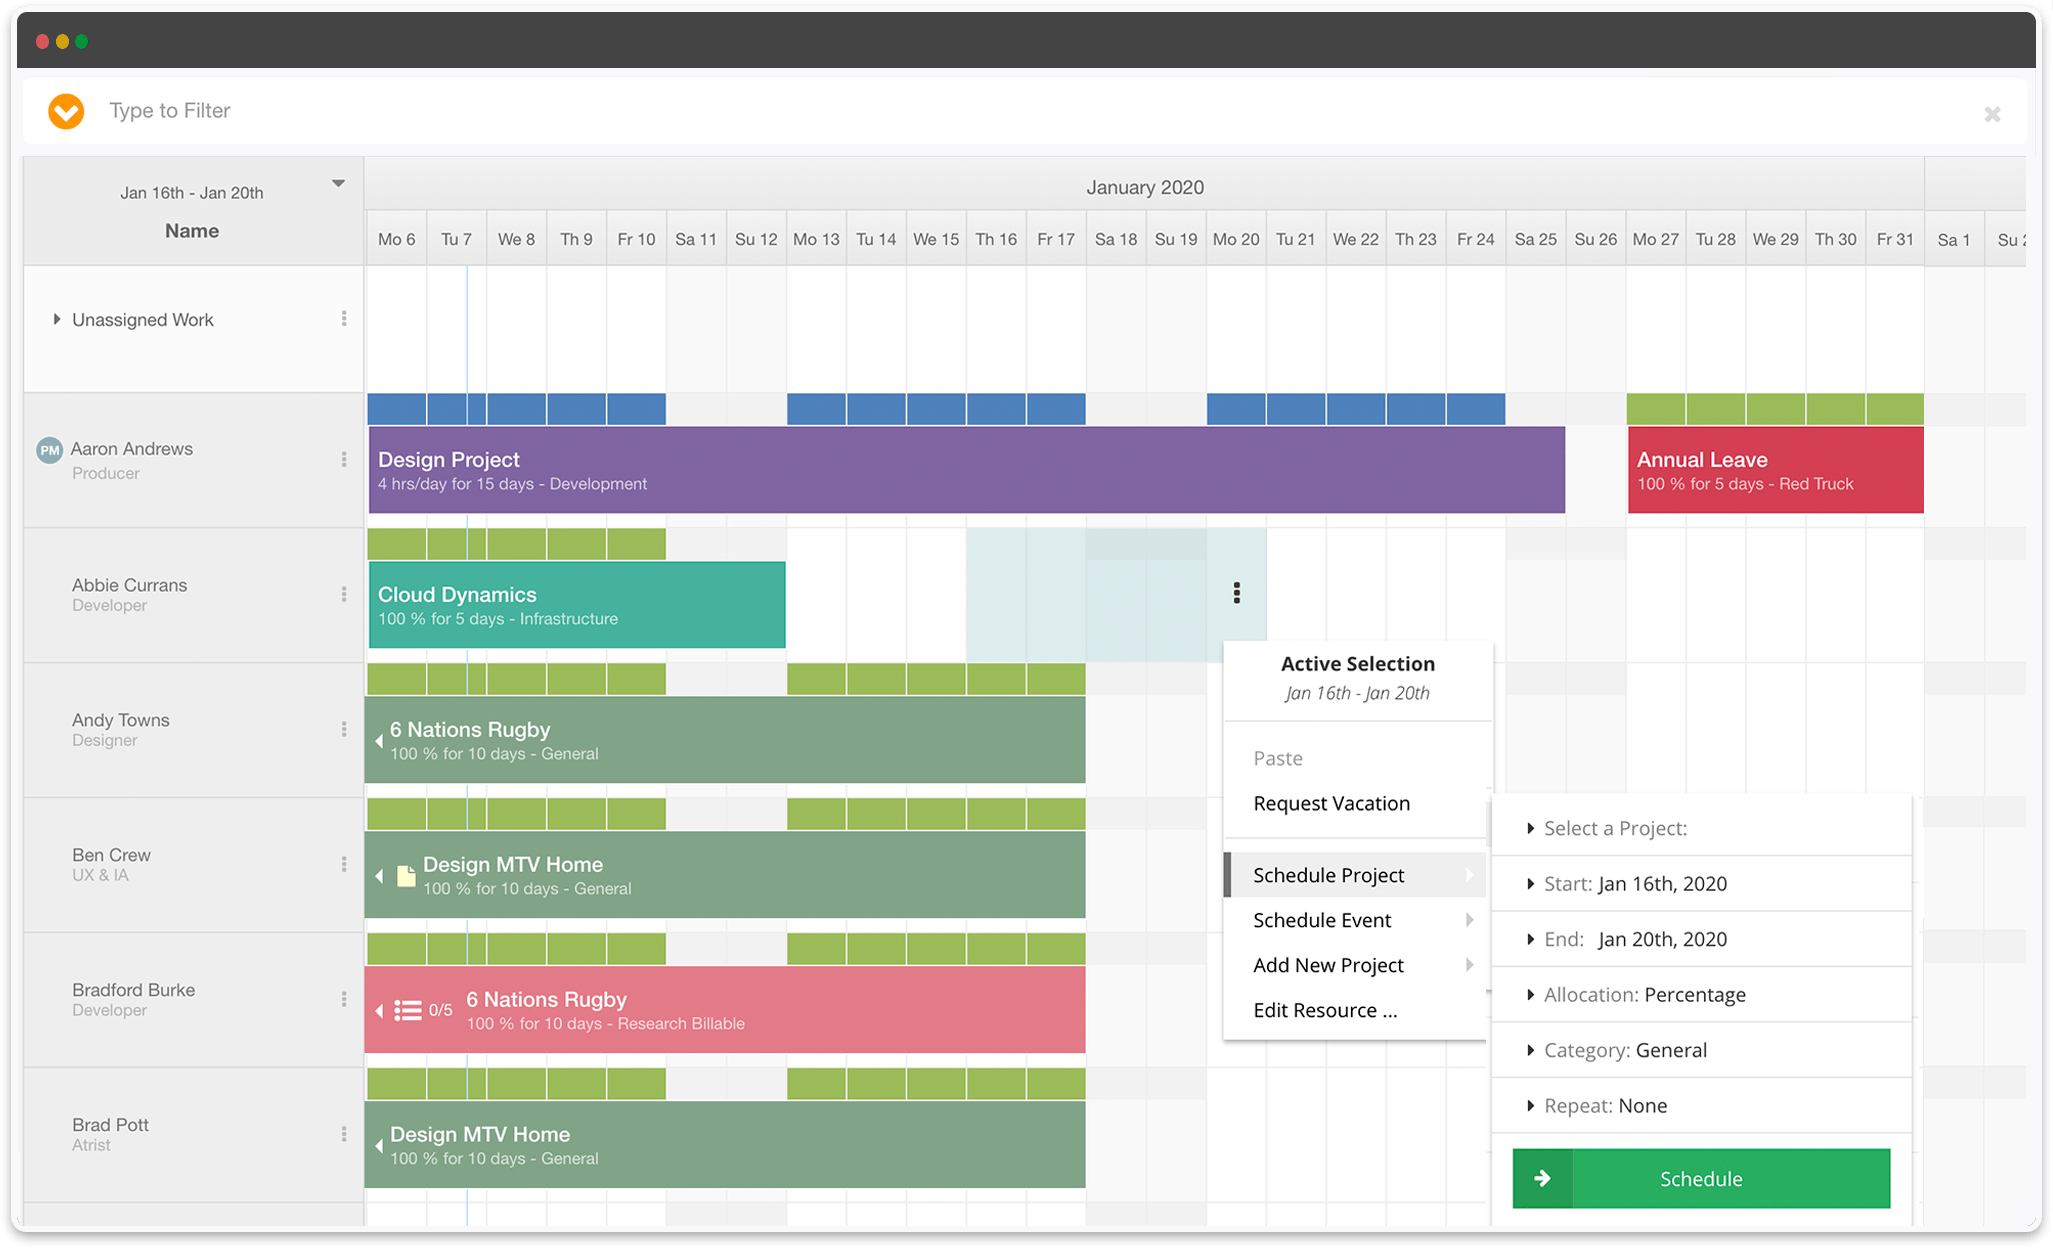 Hub Planner Scheduler for a transparent view when planning and forecasting projects. Easily view available resources based on skill sets, location as well as utilization rate. The drag & drop feature makes for simple scheduling of teams.